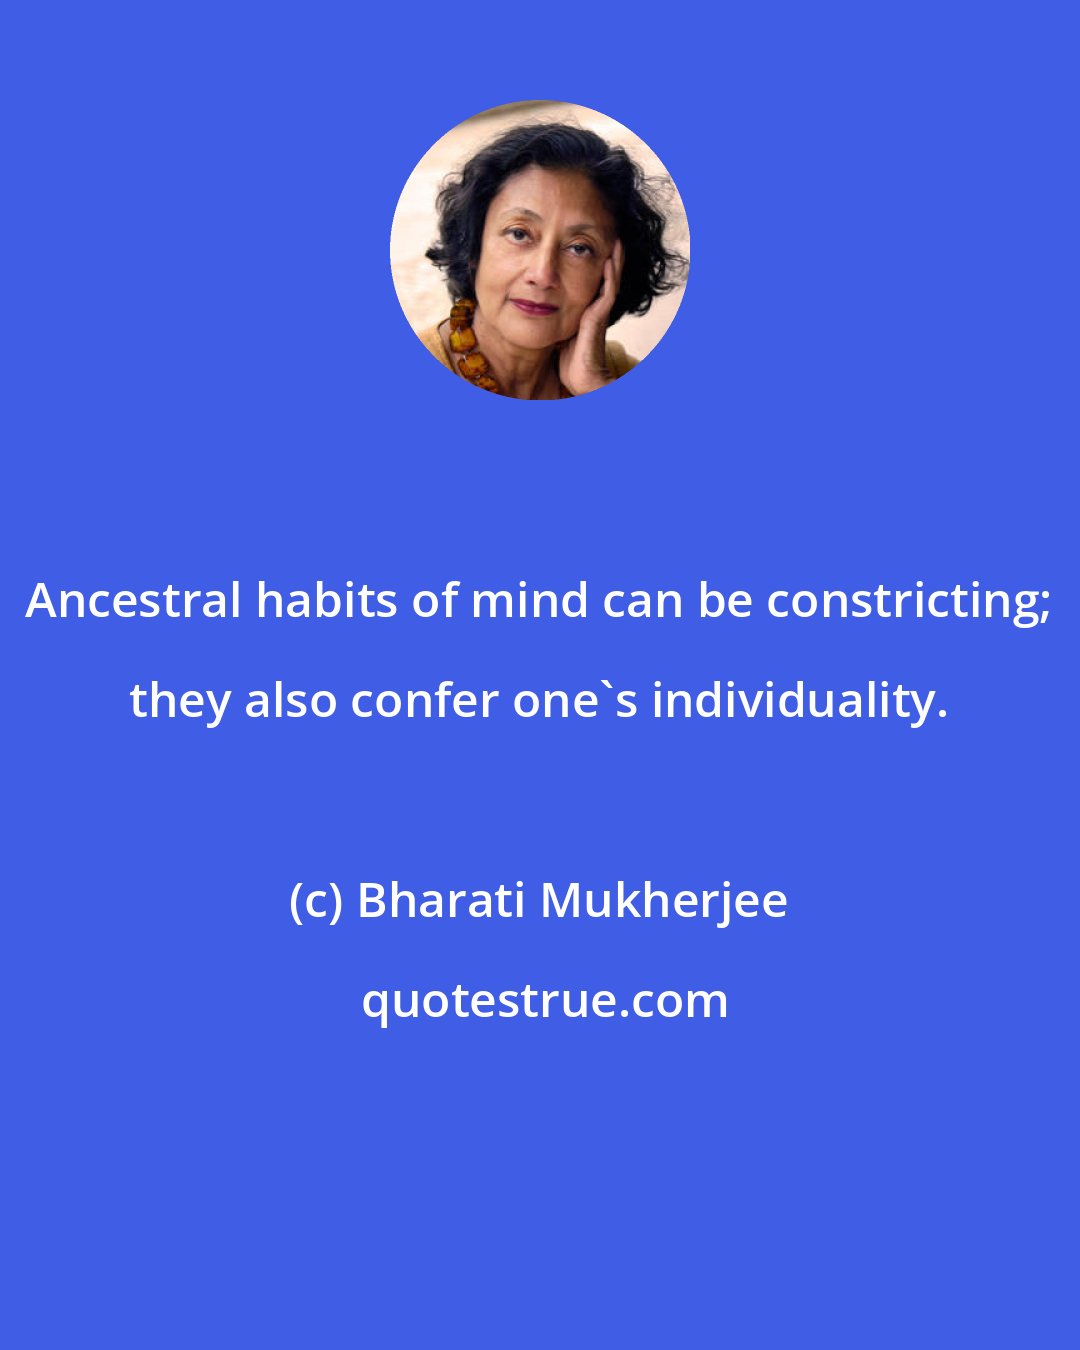 Bharati Mukherjee: Ancestral habits of mind can be constricting; they also confer one's individuality.